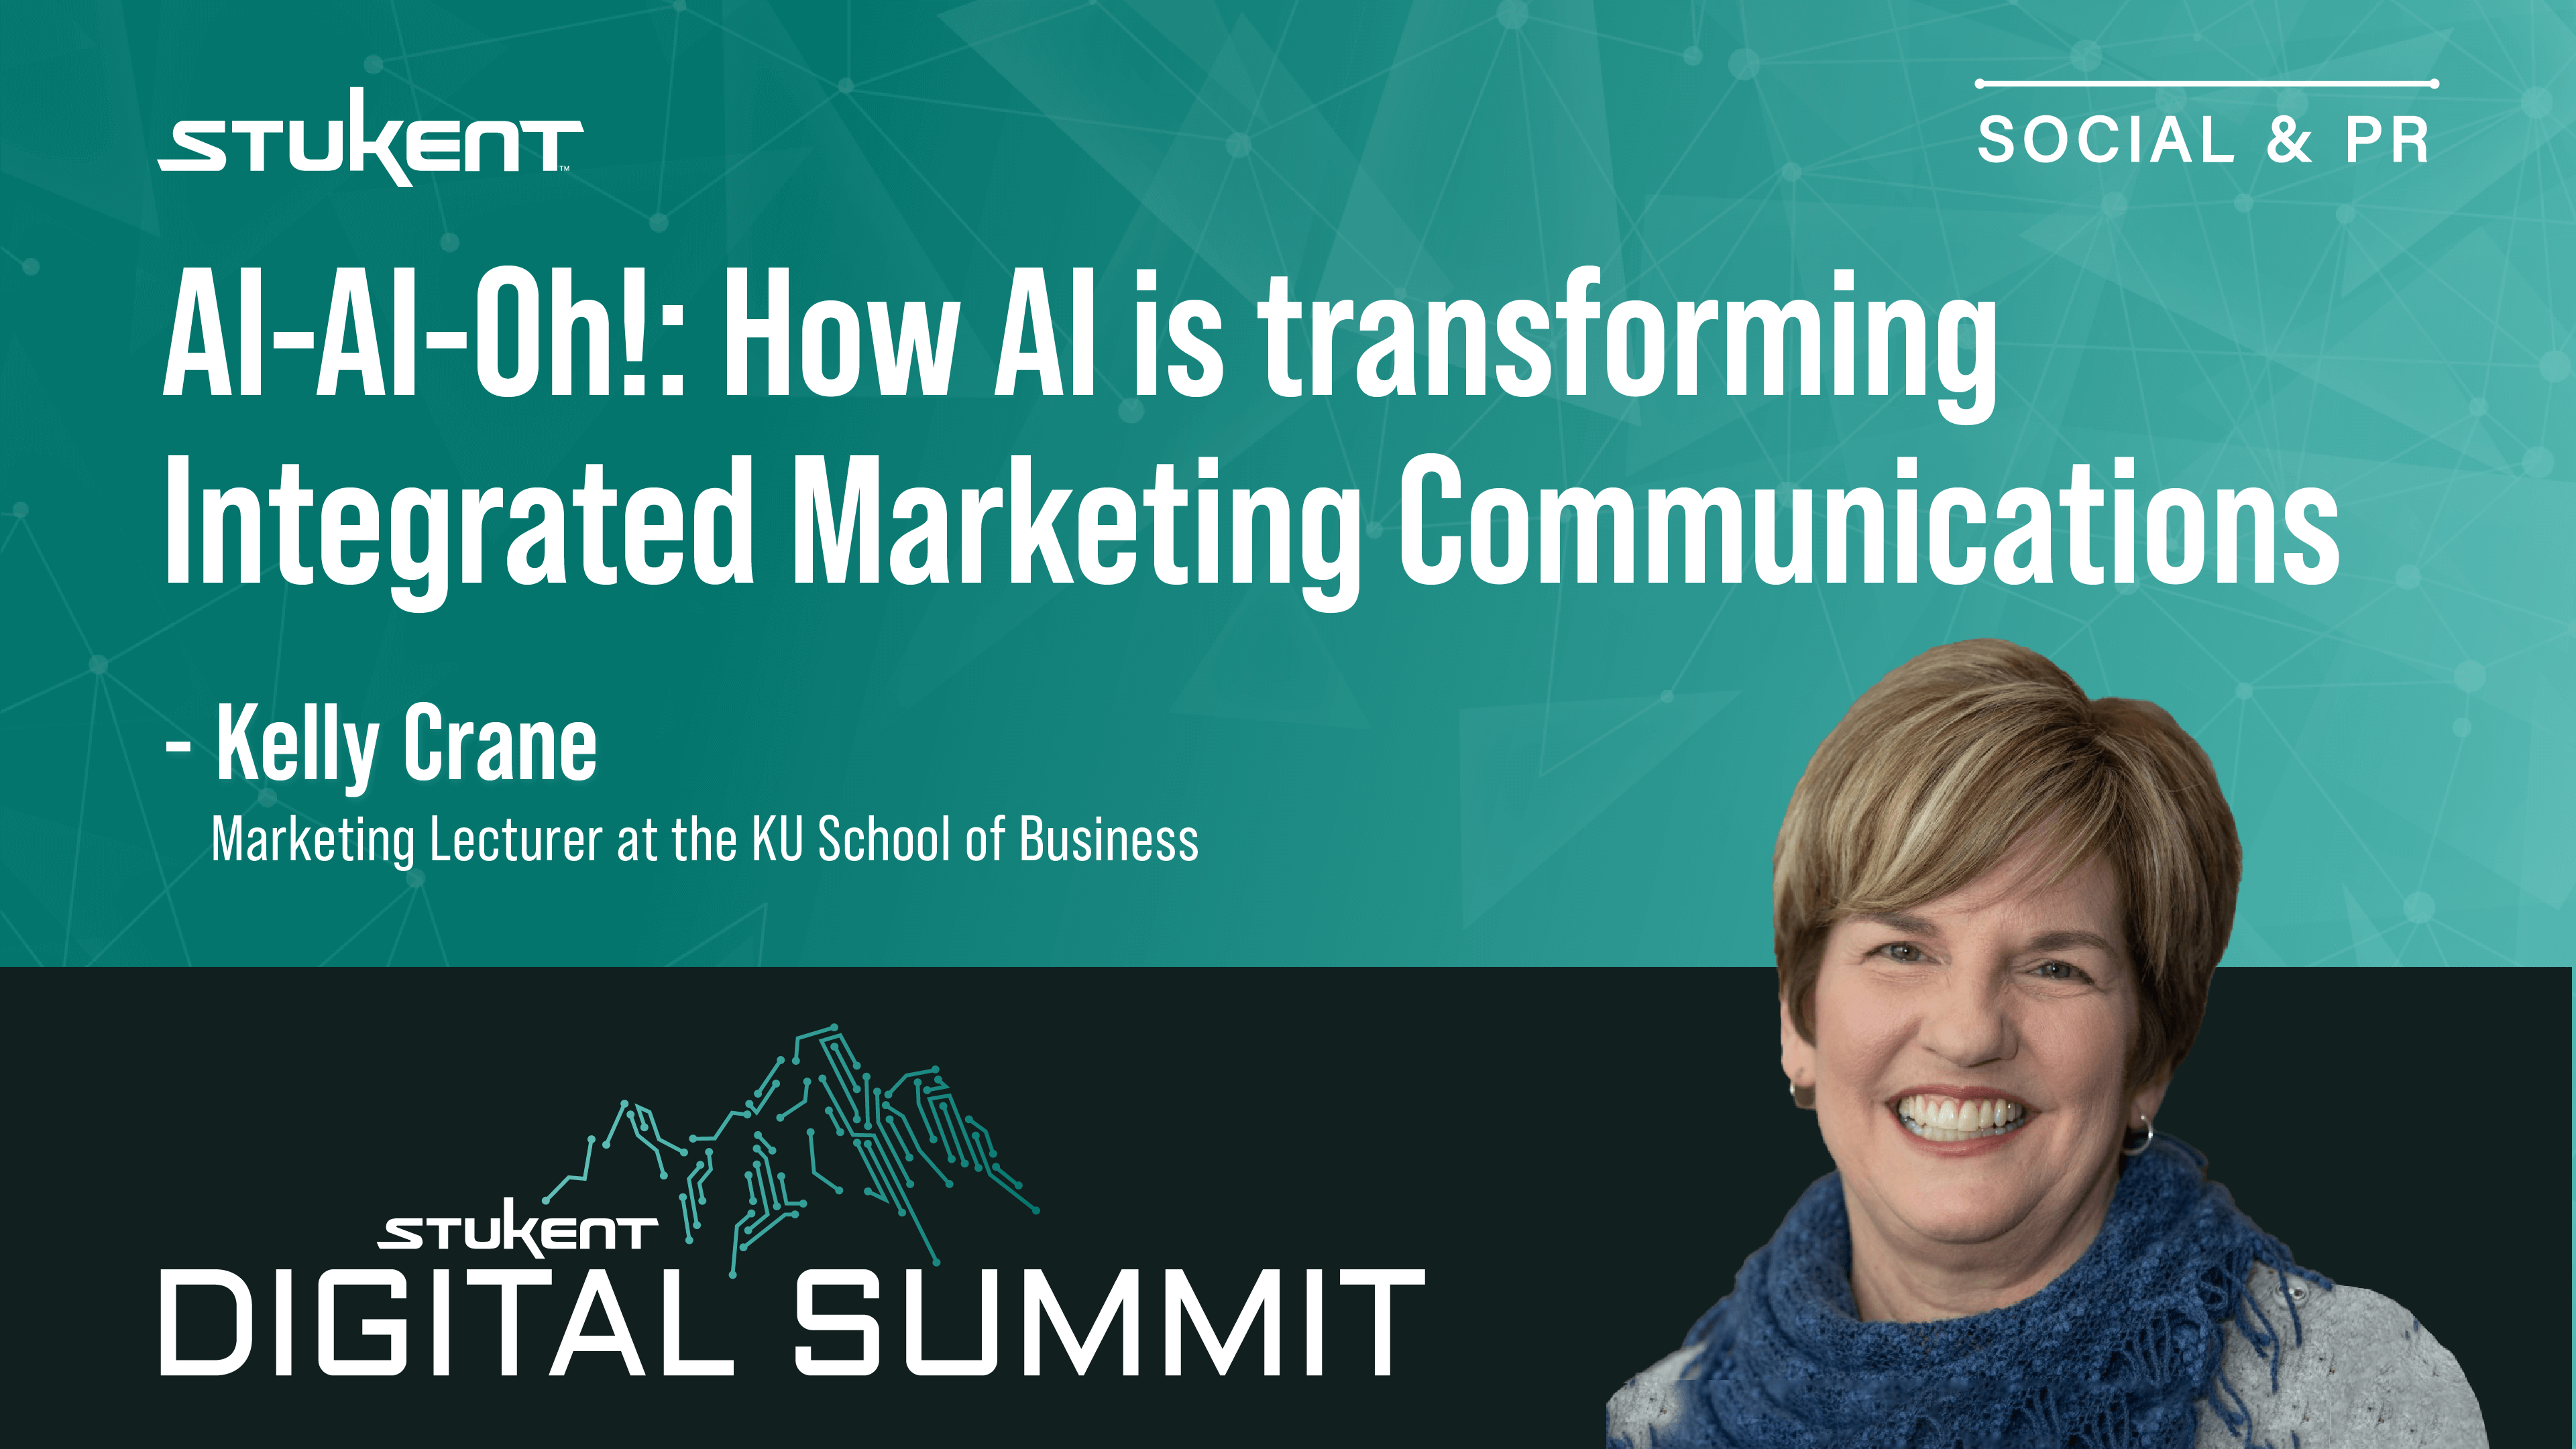 AI-AI-Oh!: How AI is Transforming Integrated Marketing Communications